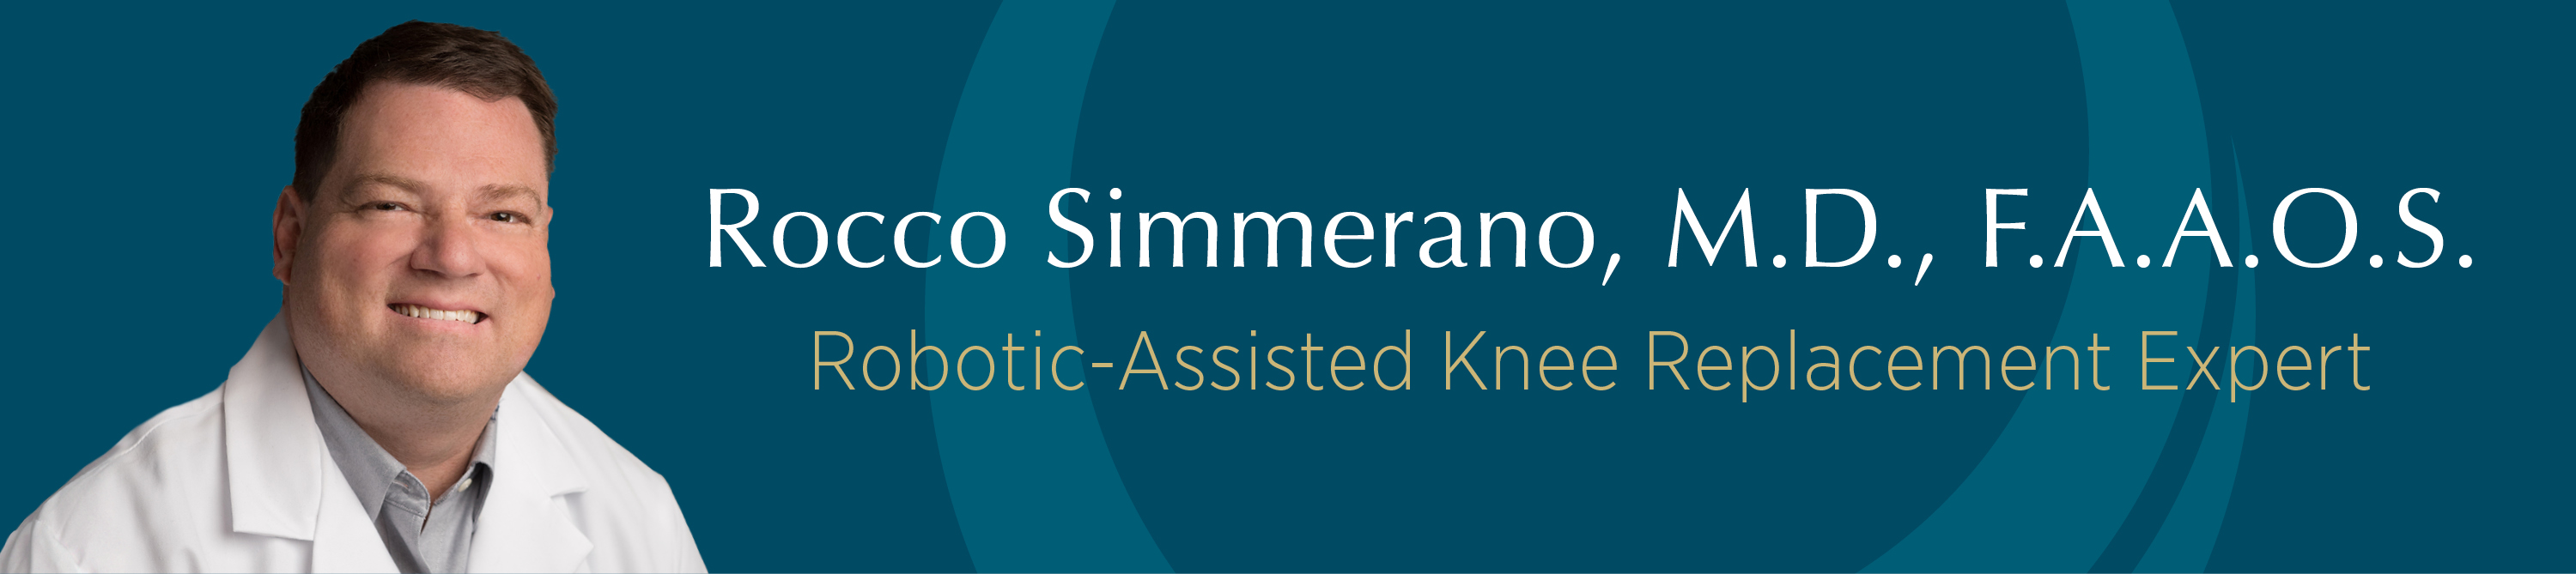 Rocco Simmerano, M.D., F.A.A.O.S. - Robotic-Assisted Knee Replacement Expert